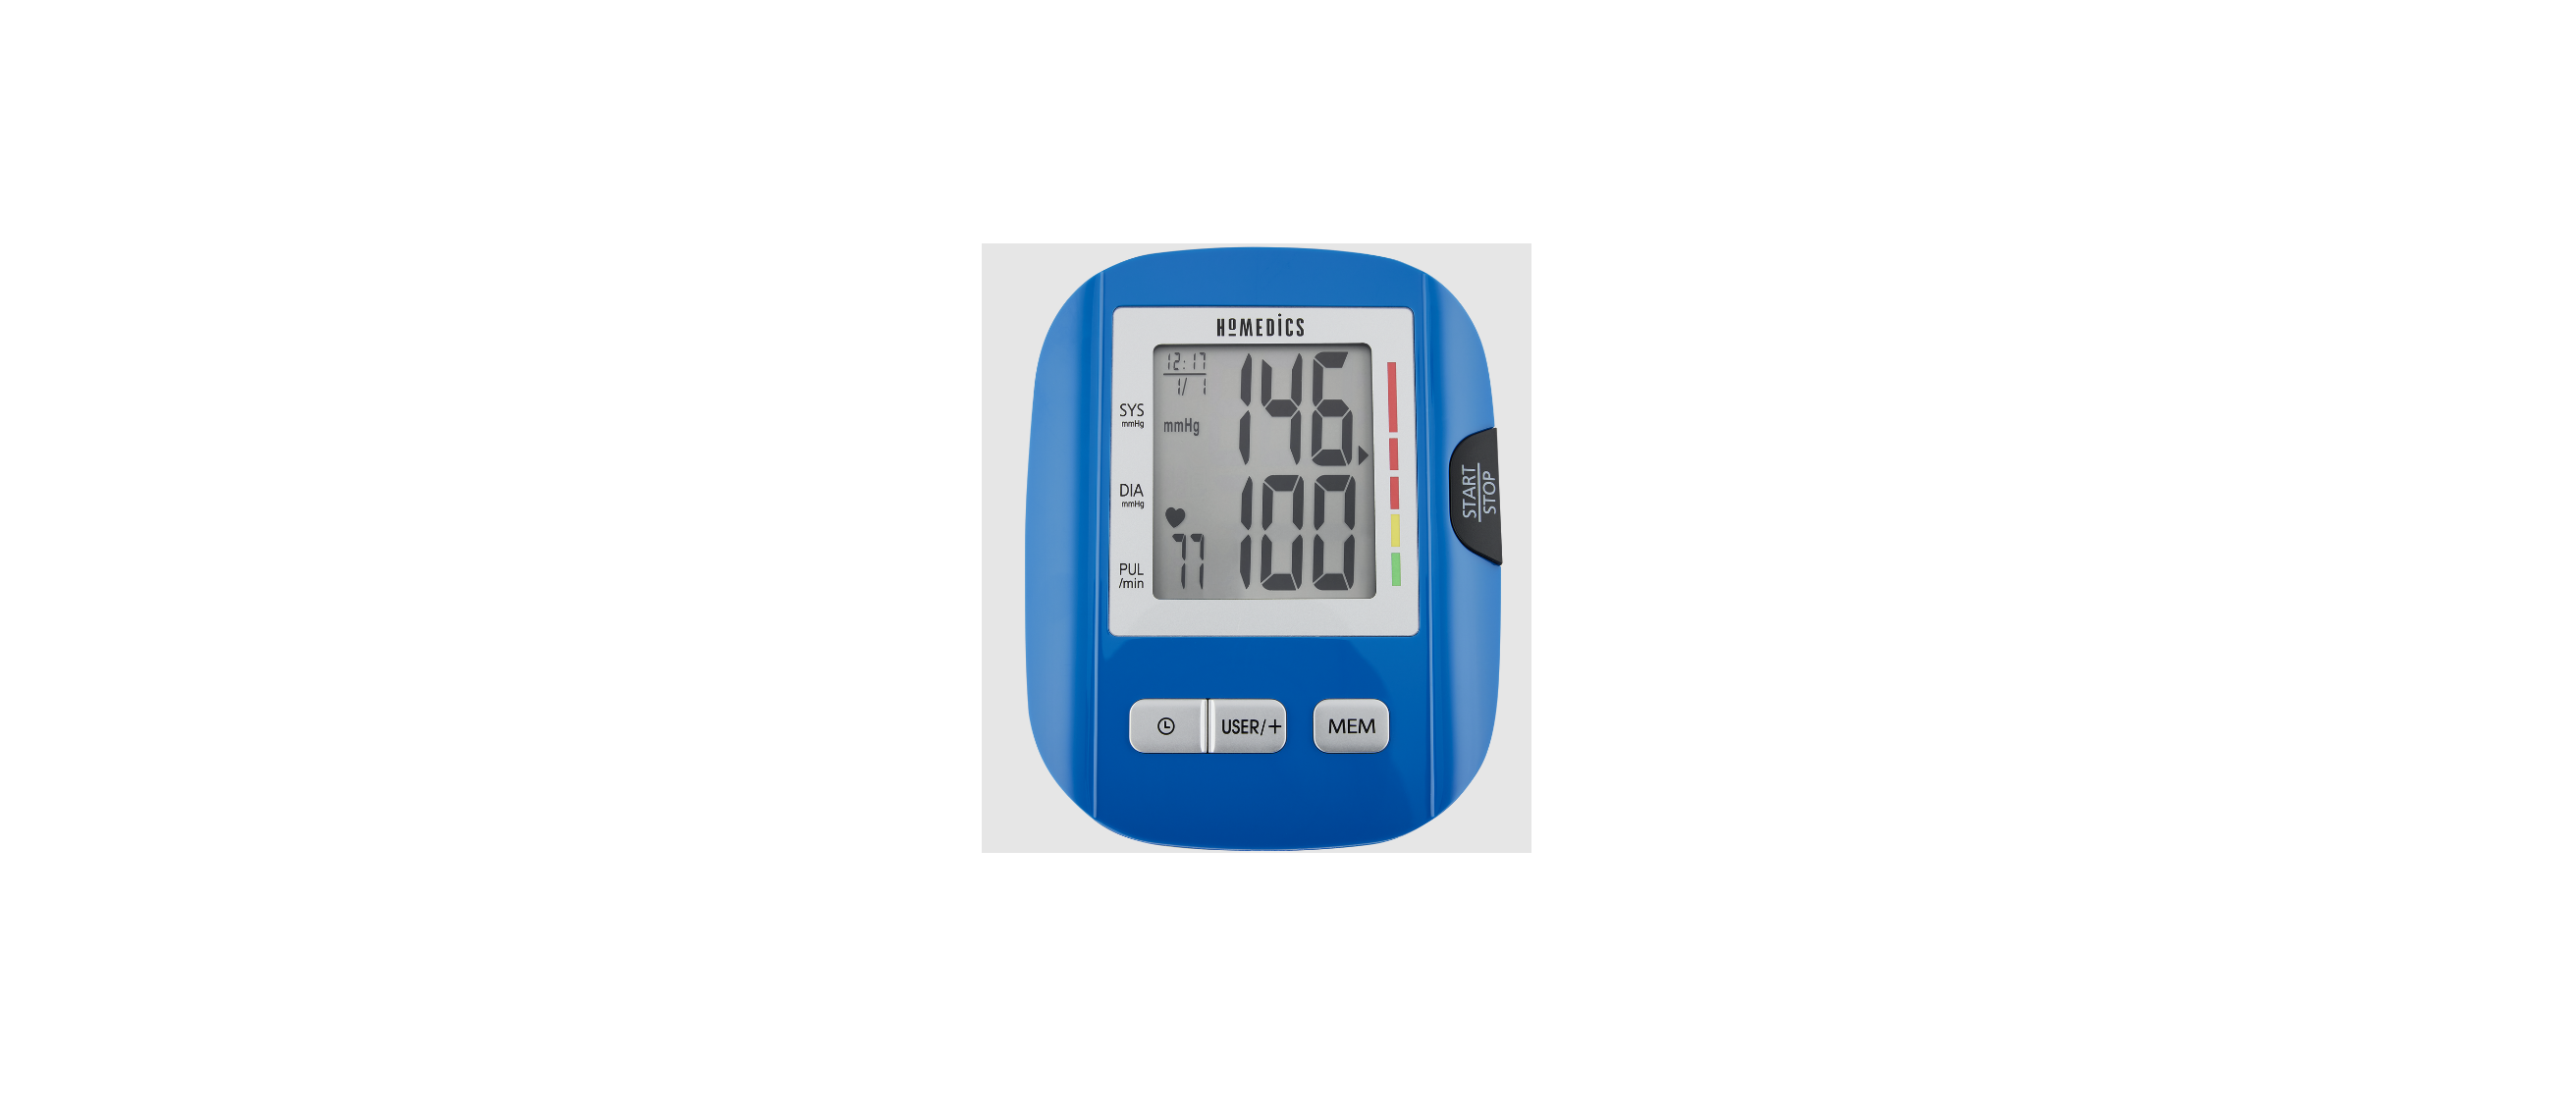 You are currently viewing Homedics BPW-O200 Wrist Blood Pressure Monitor User Manual